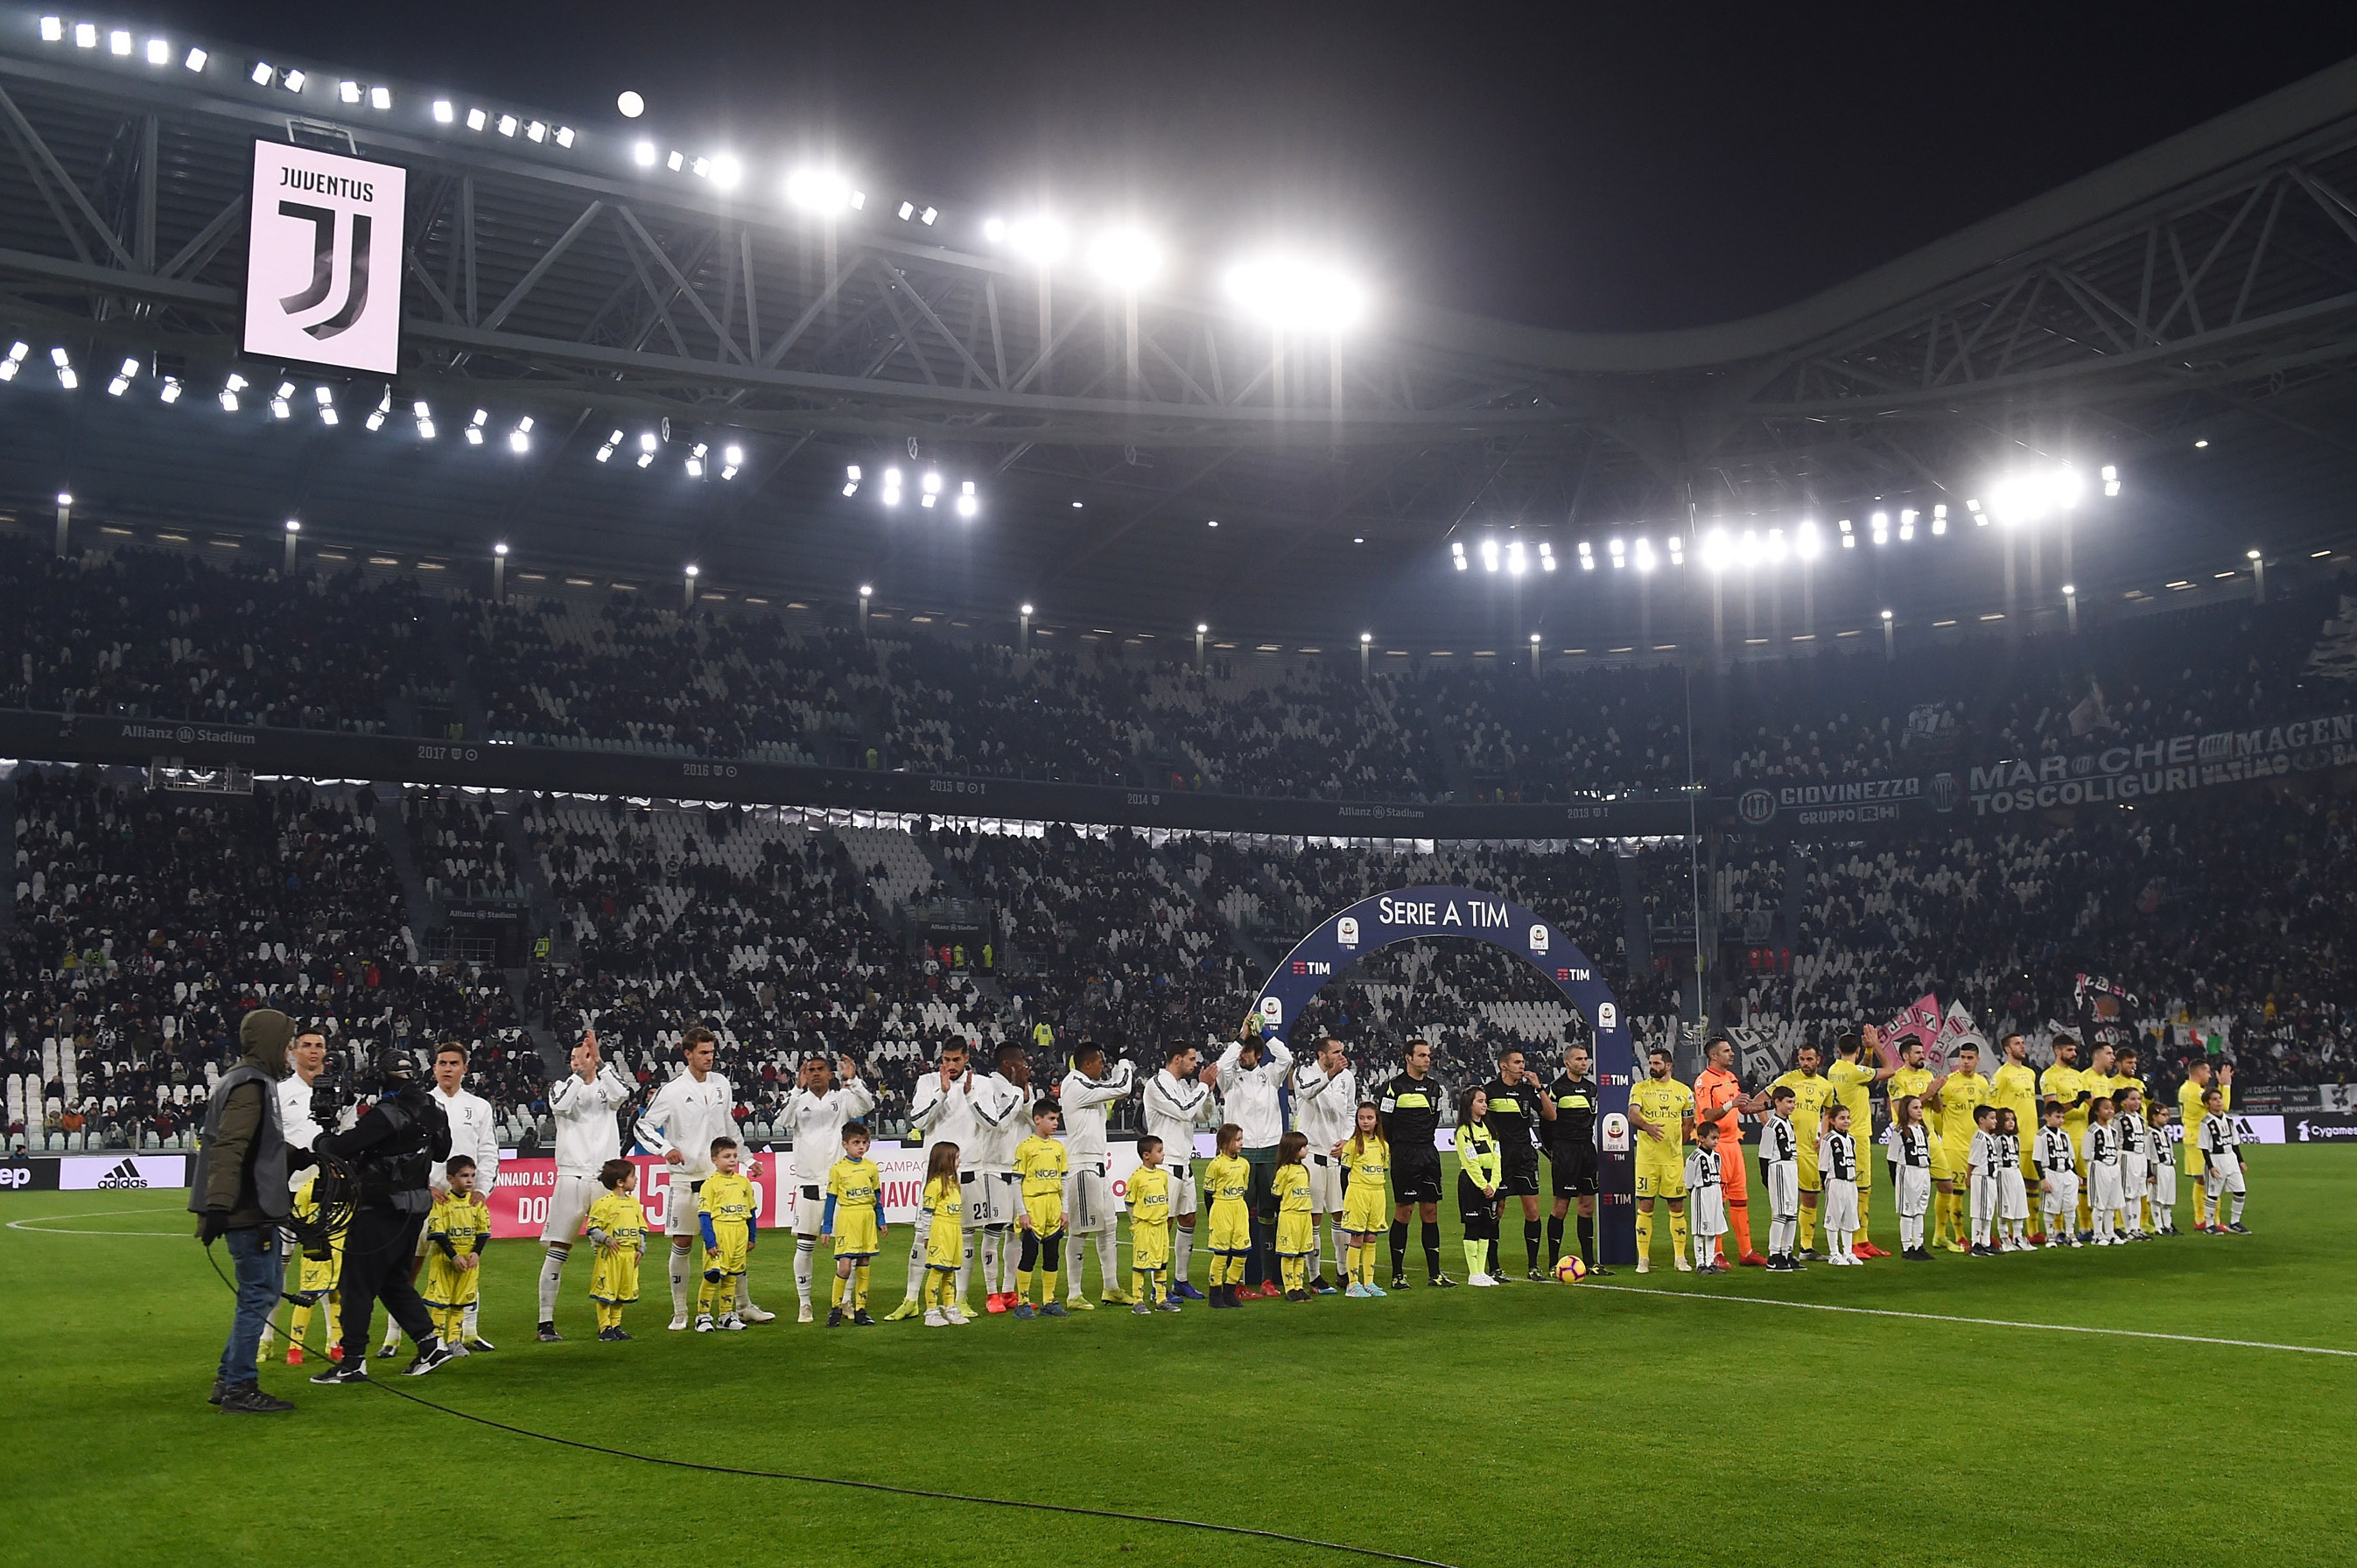 Why Are There So Many Empty Seats At Juventus Home Games